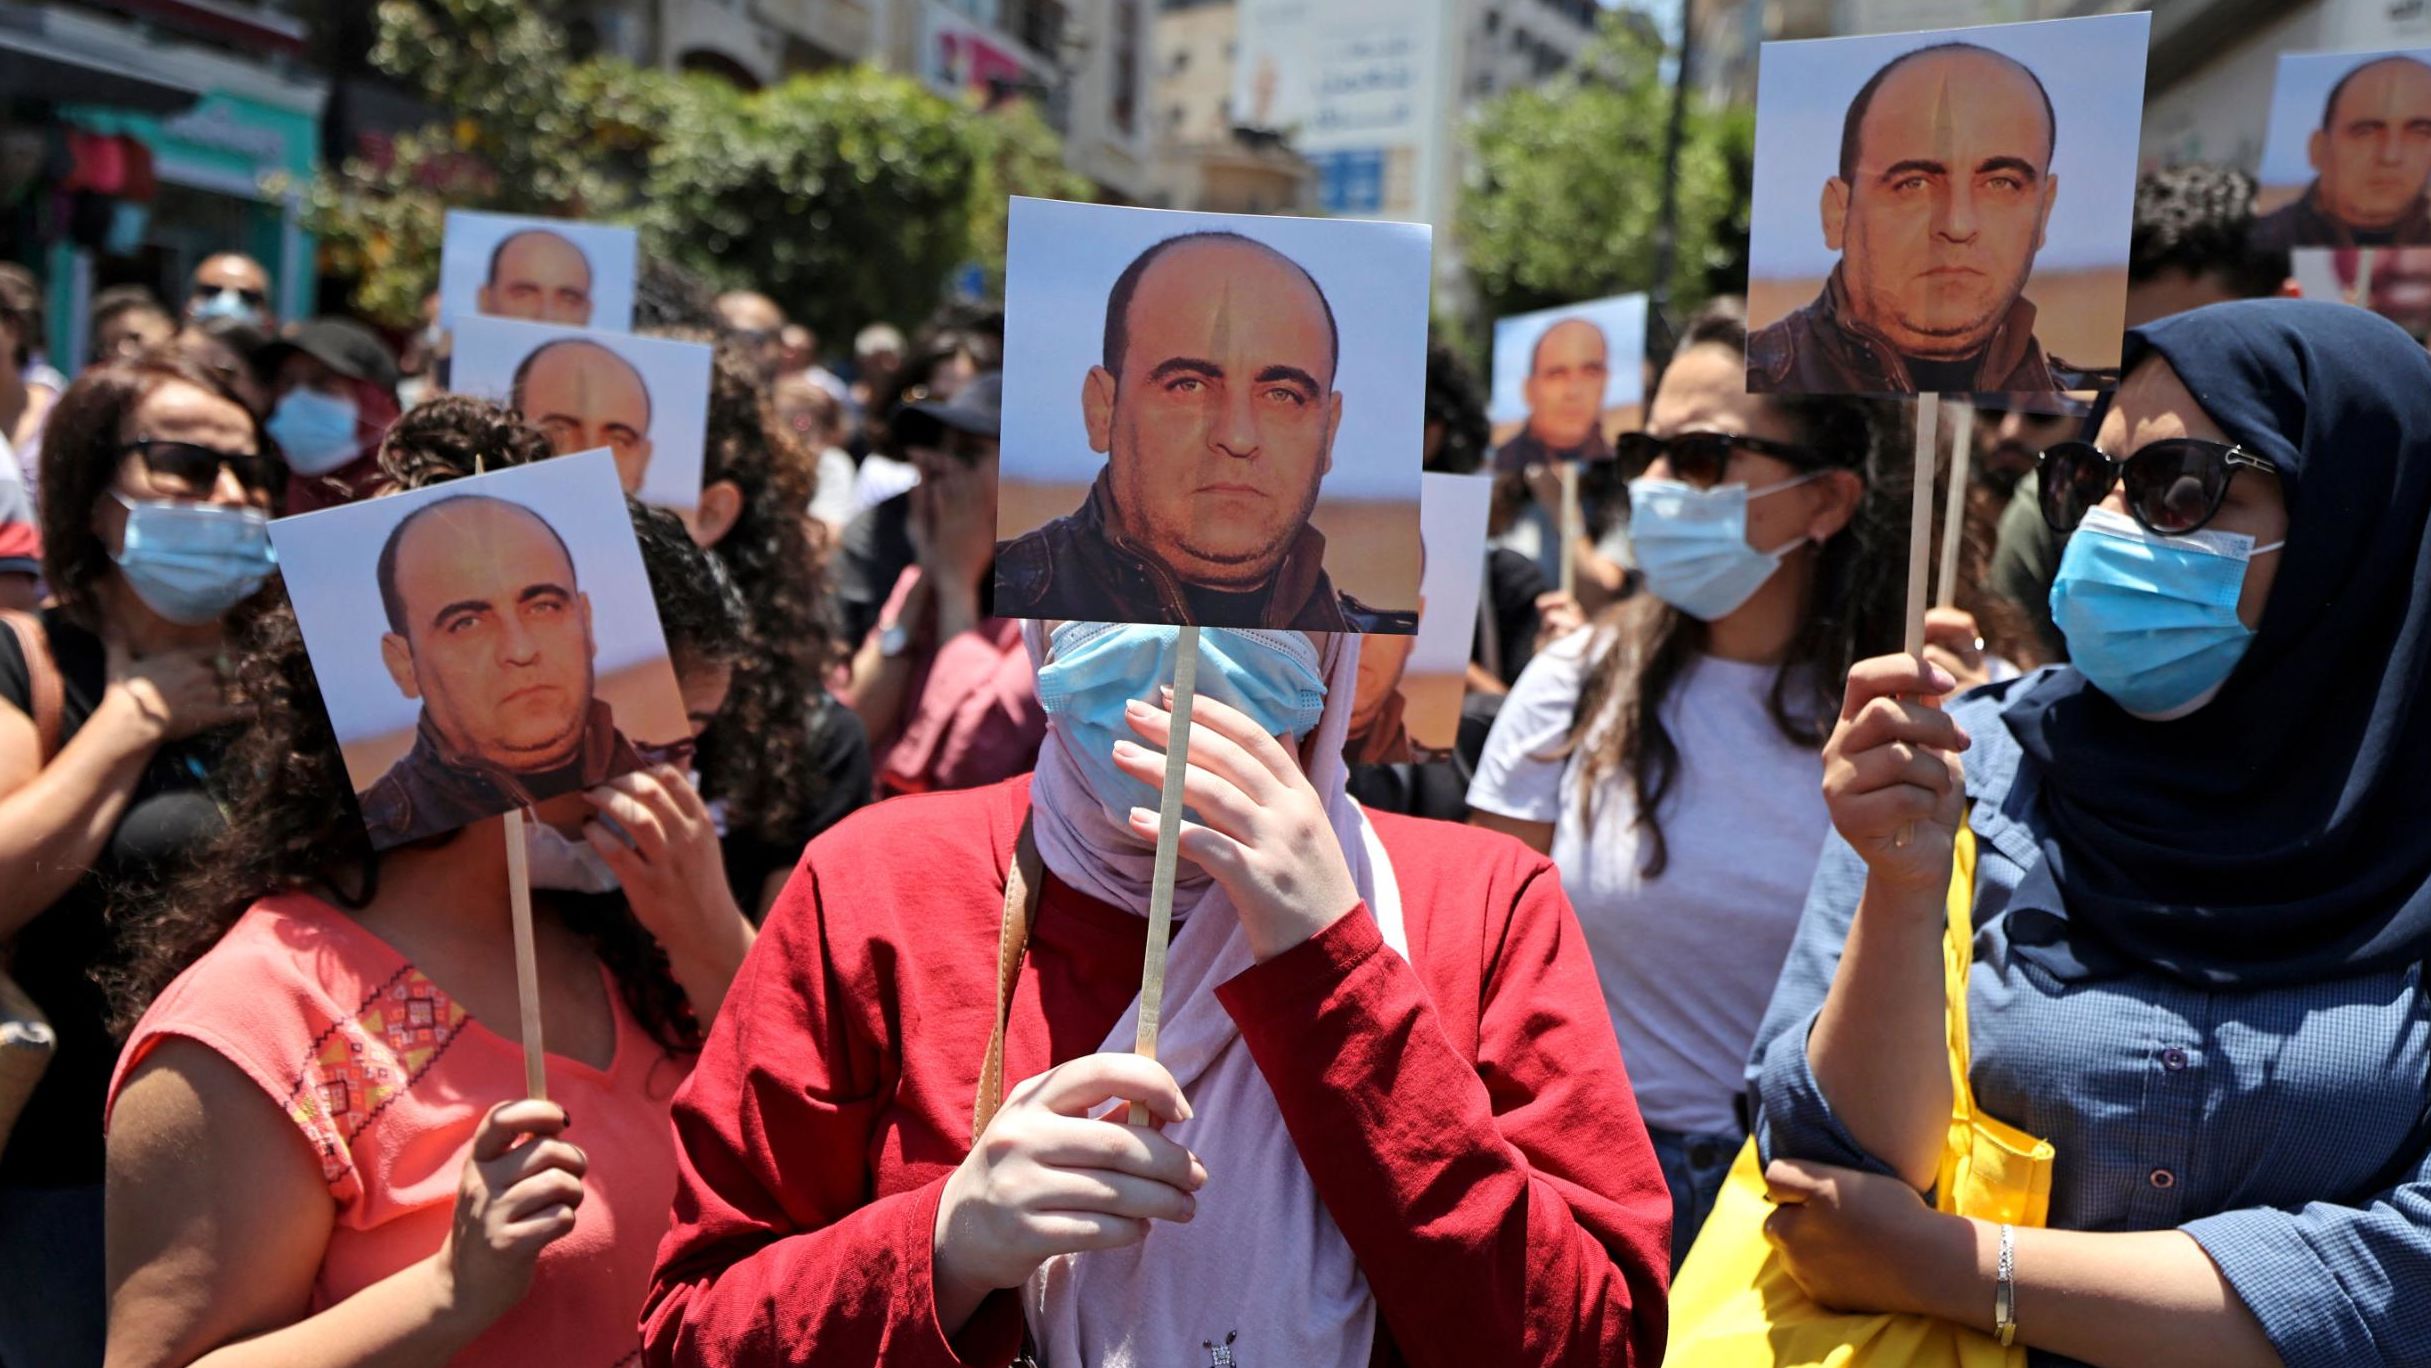 Protestors hold images of Palestinian activist Nizar Banat, who died while in the custody of PA security forces on Thursday morning.